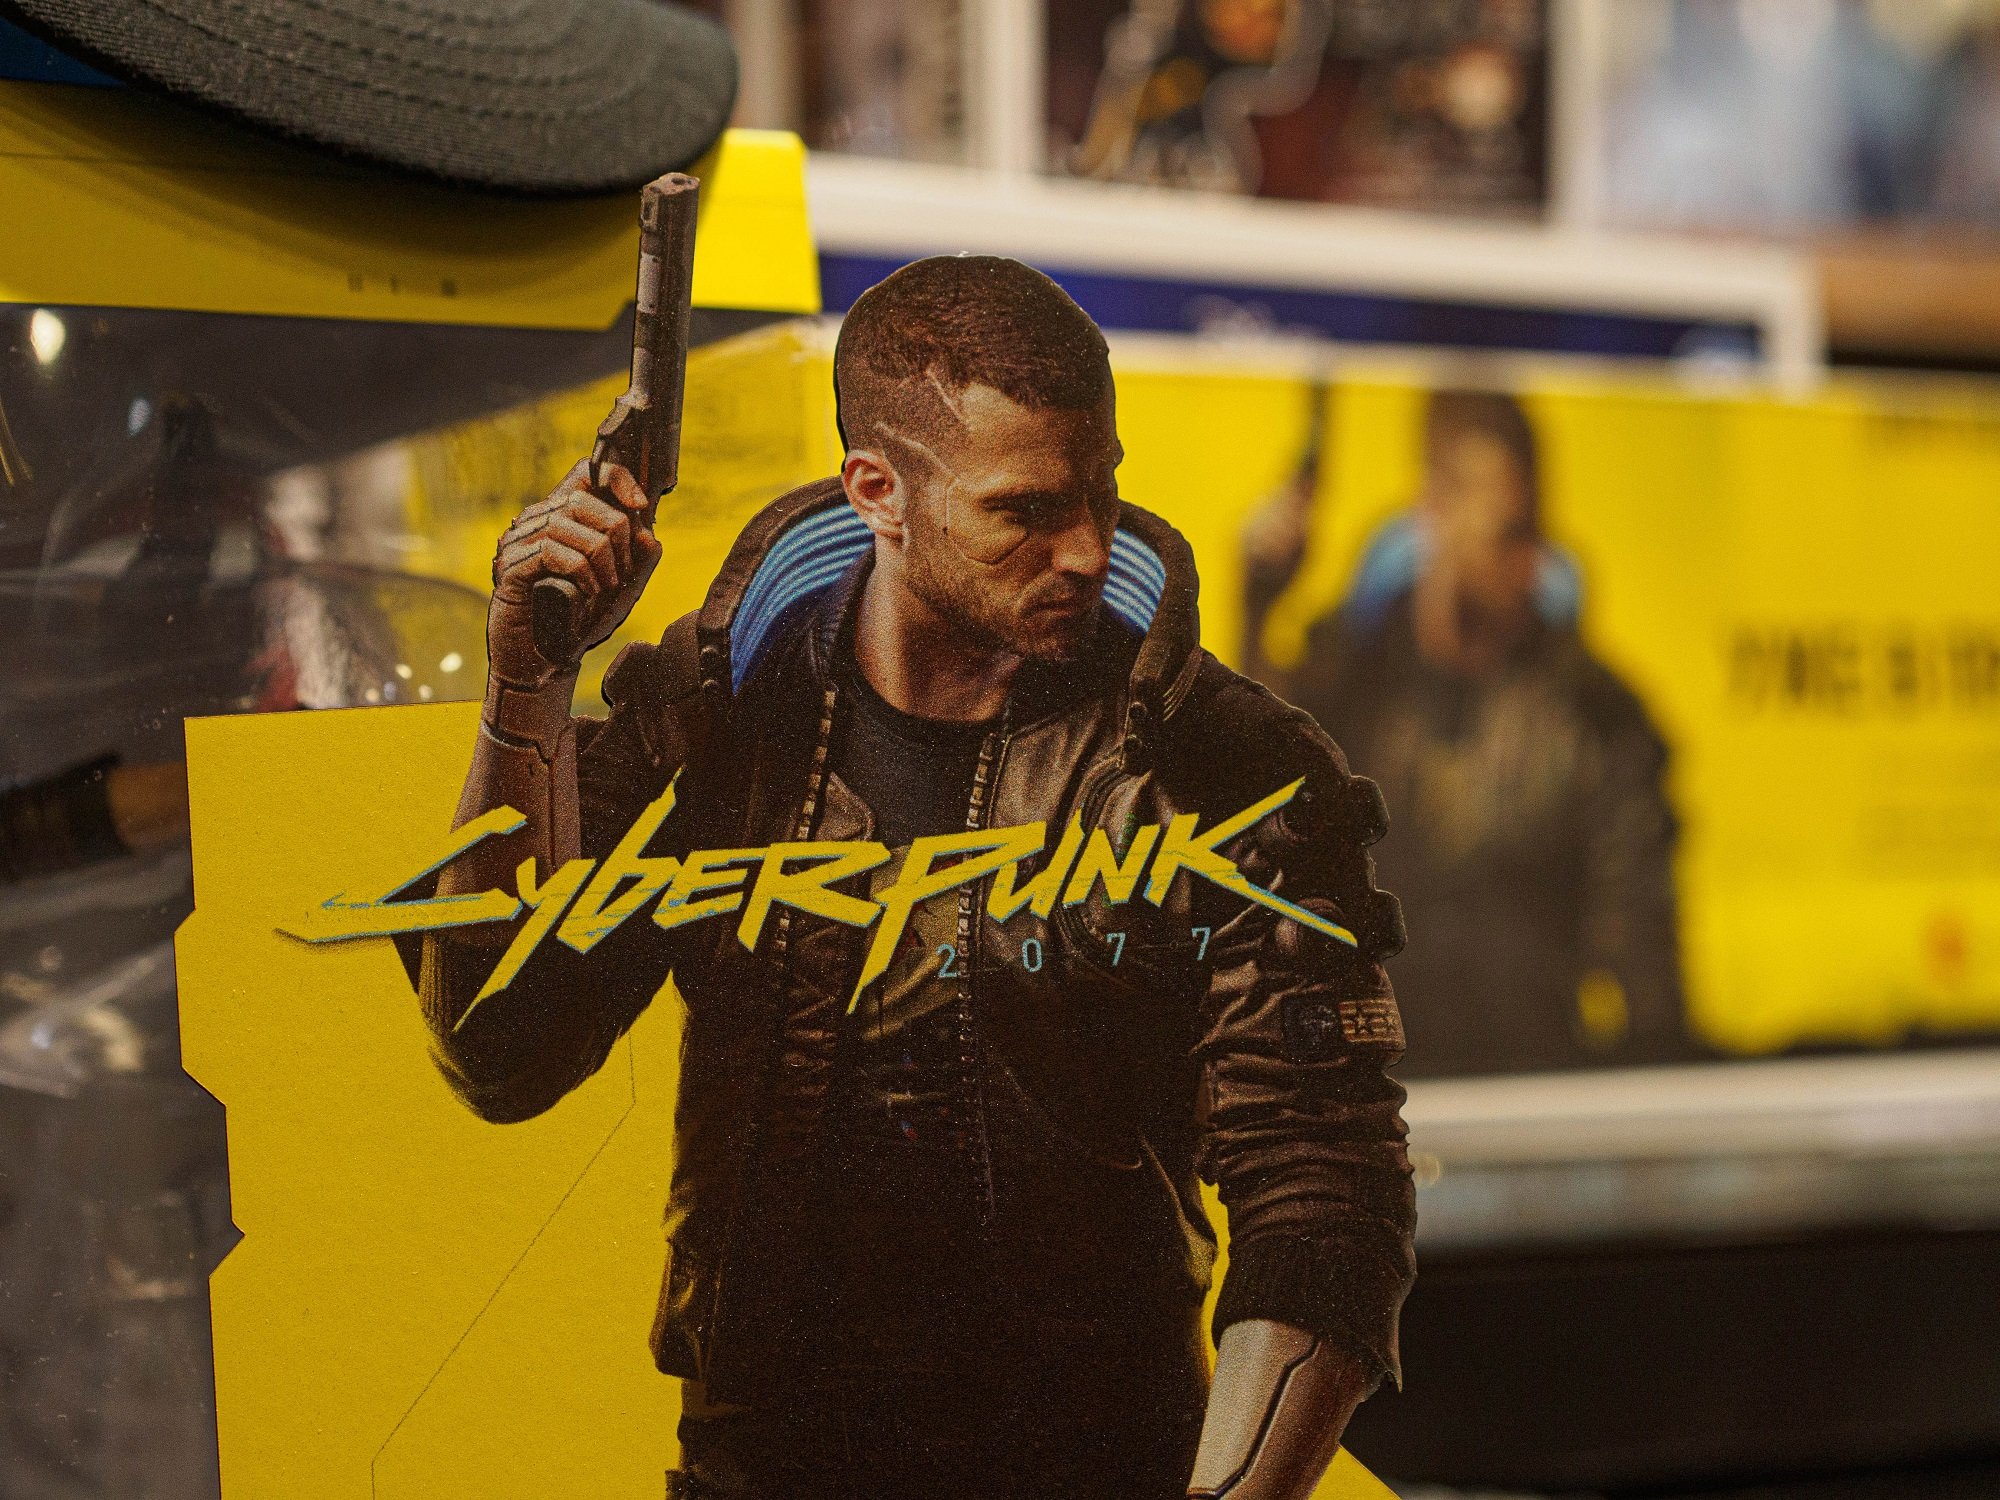 Promotional materials Cyberpunk 2077 by CD Projekt Red